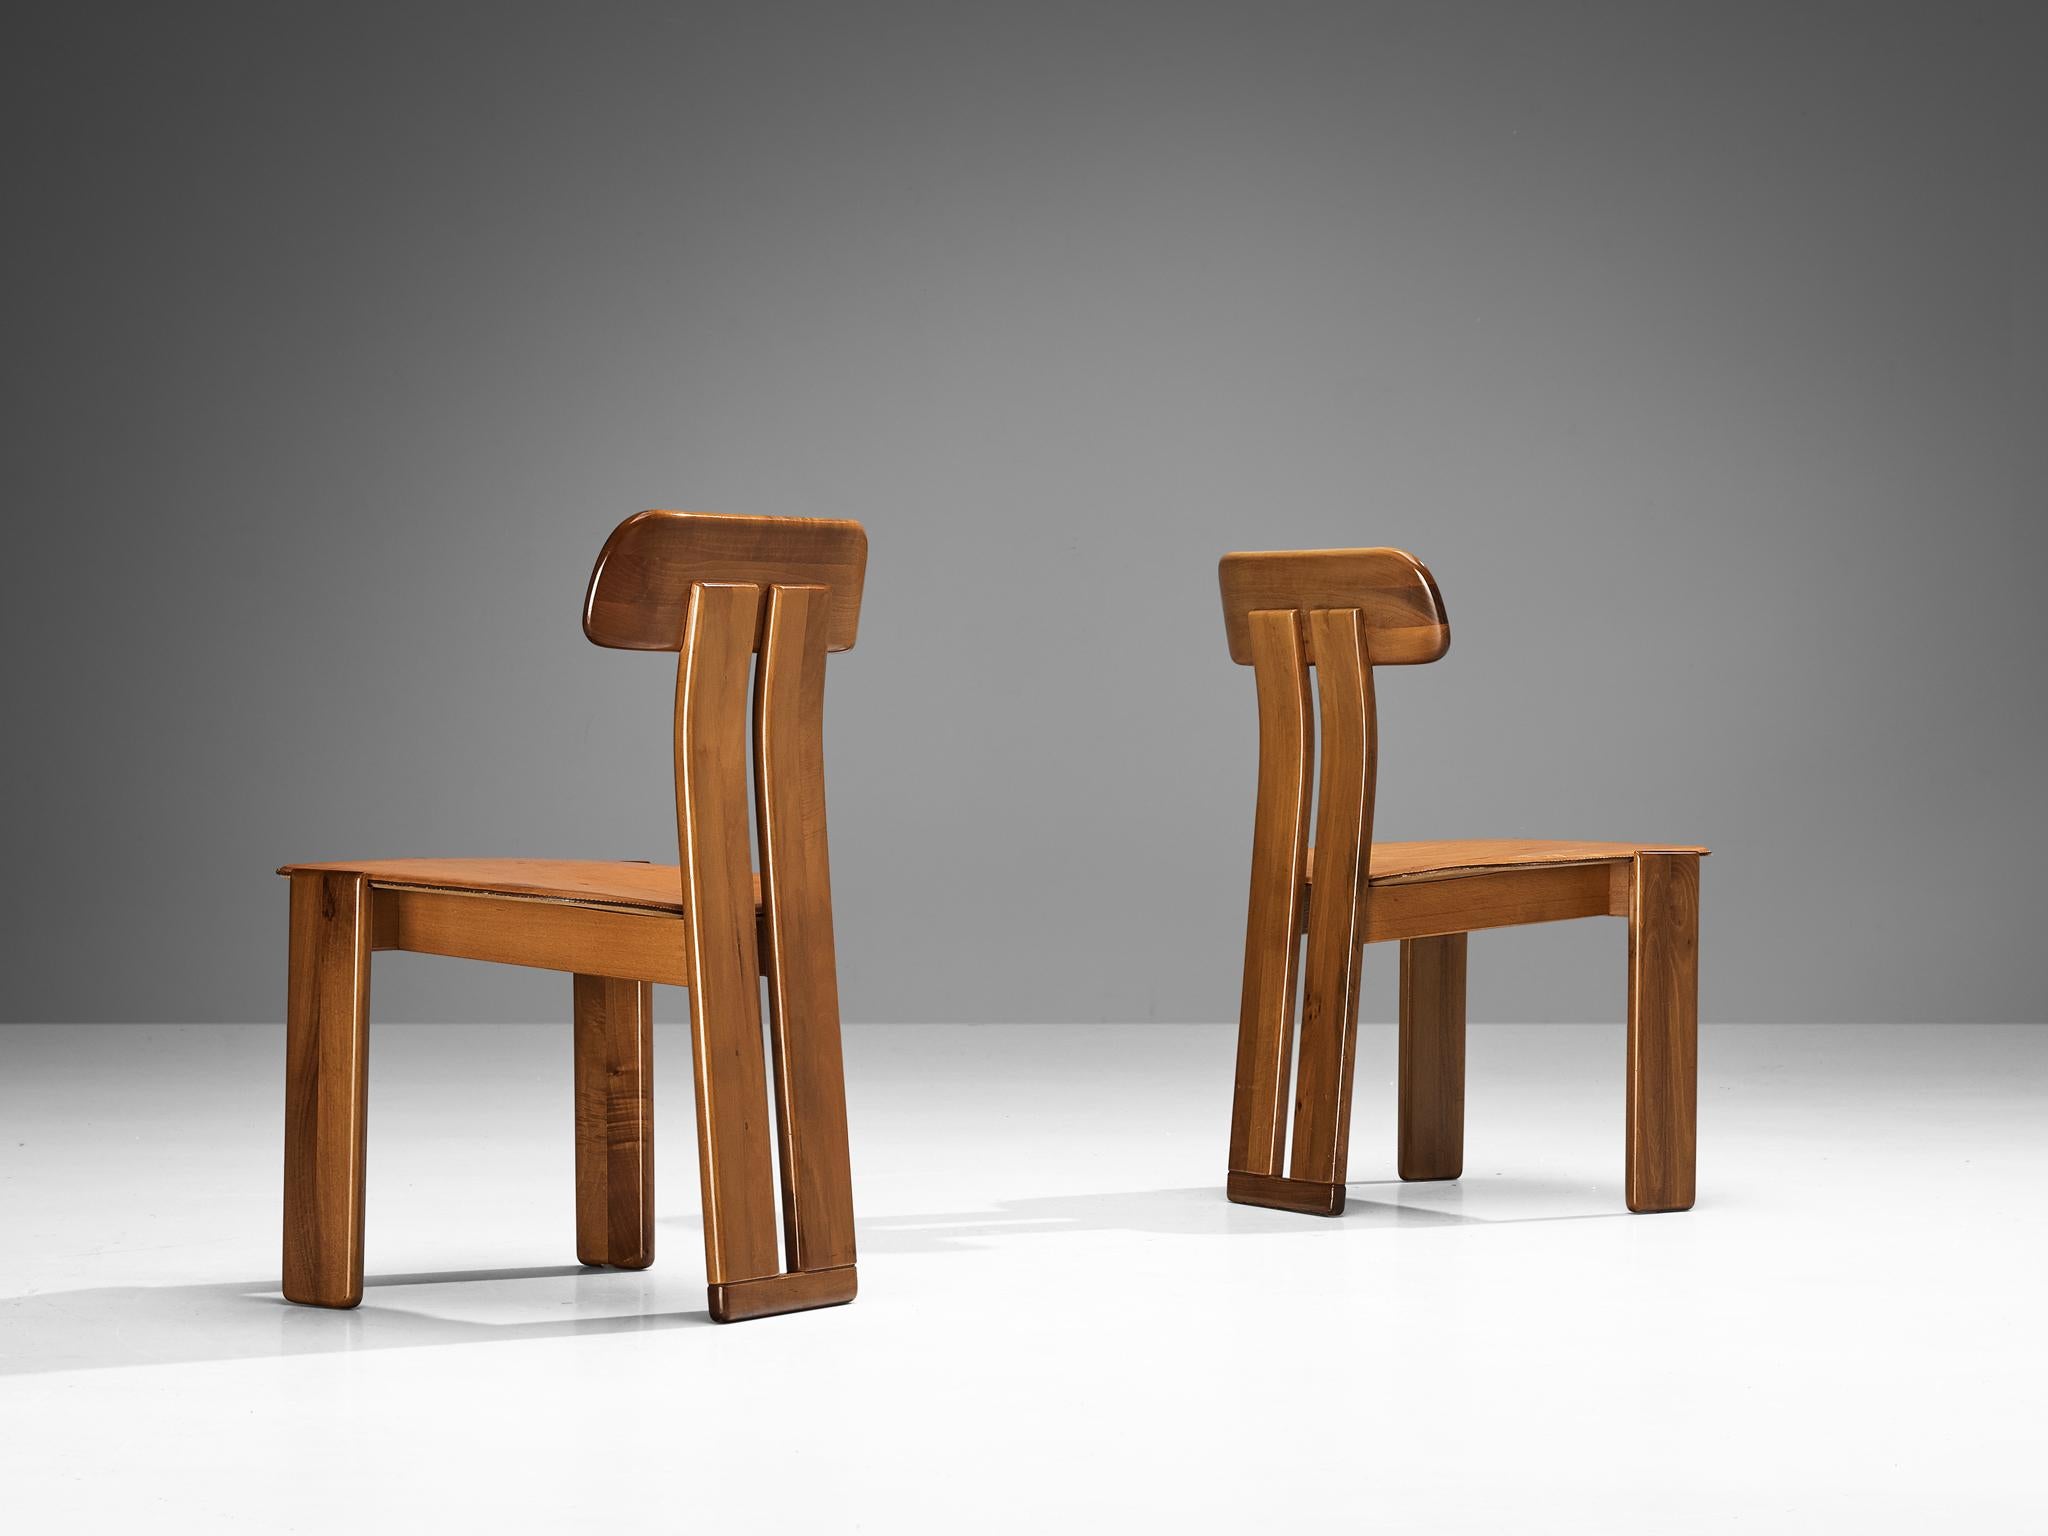 Mario Marenco for Mobil Girgi, pair of dining chairs model ‘Sapporo’, walnut, leather, Italy, 1970s

Beautiful pair of dining chairs in walnut and cognac leather designed by Mario Marenco in the 1970s. These chairs feature wonderful backrests,